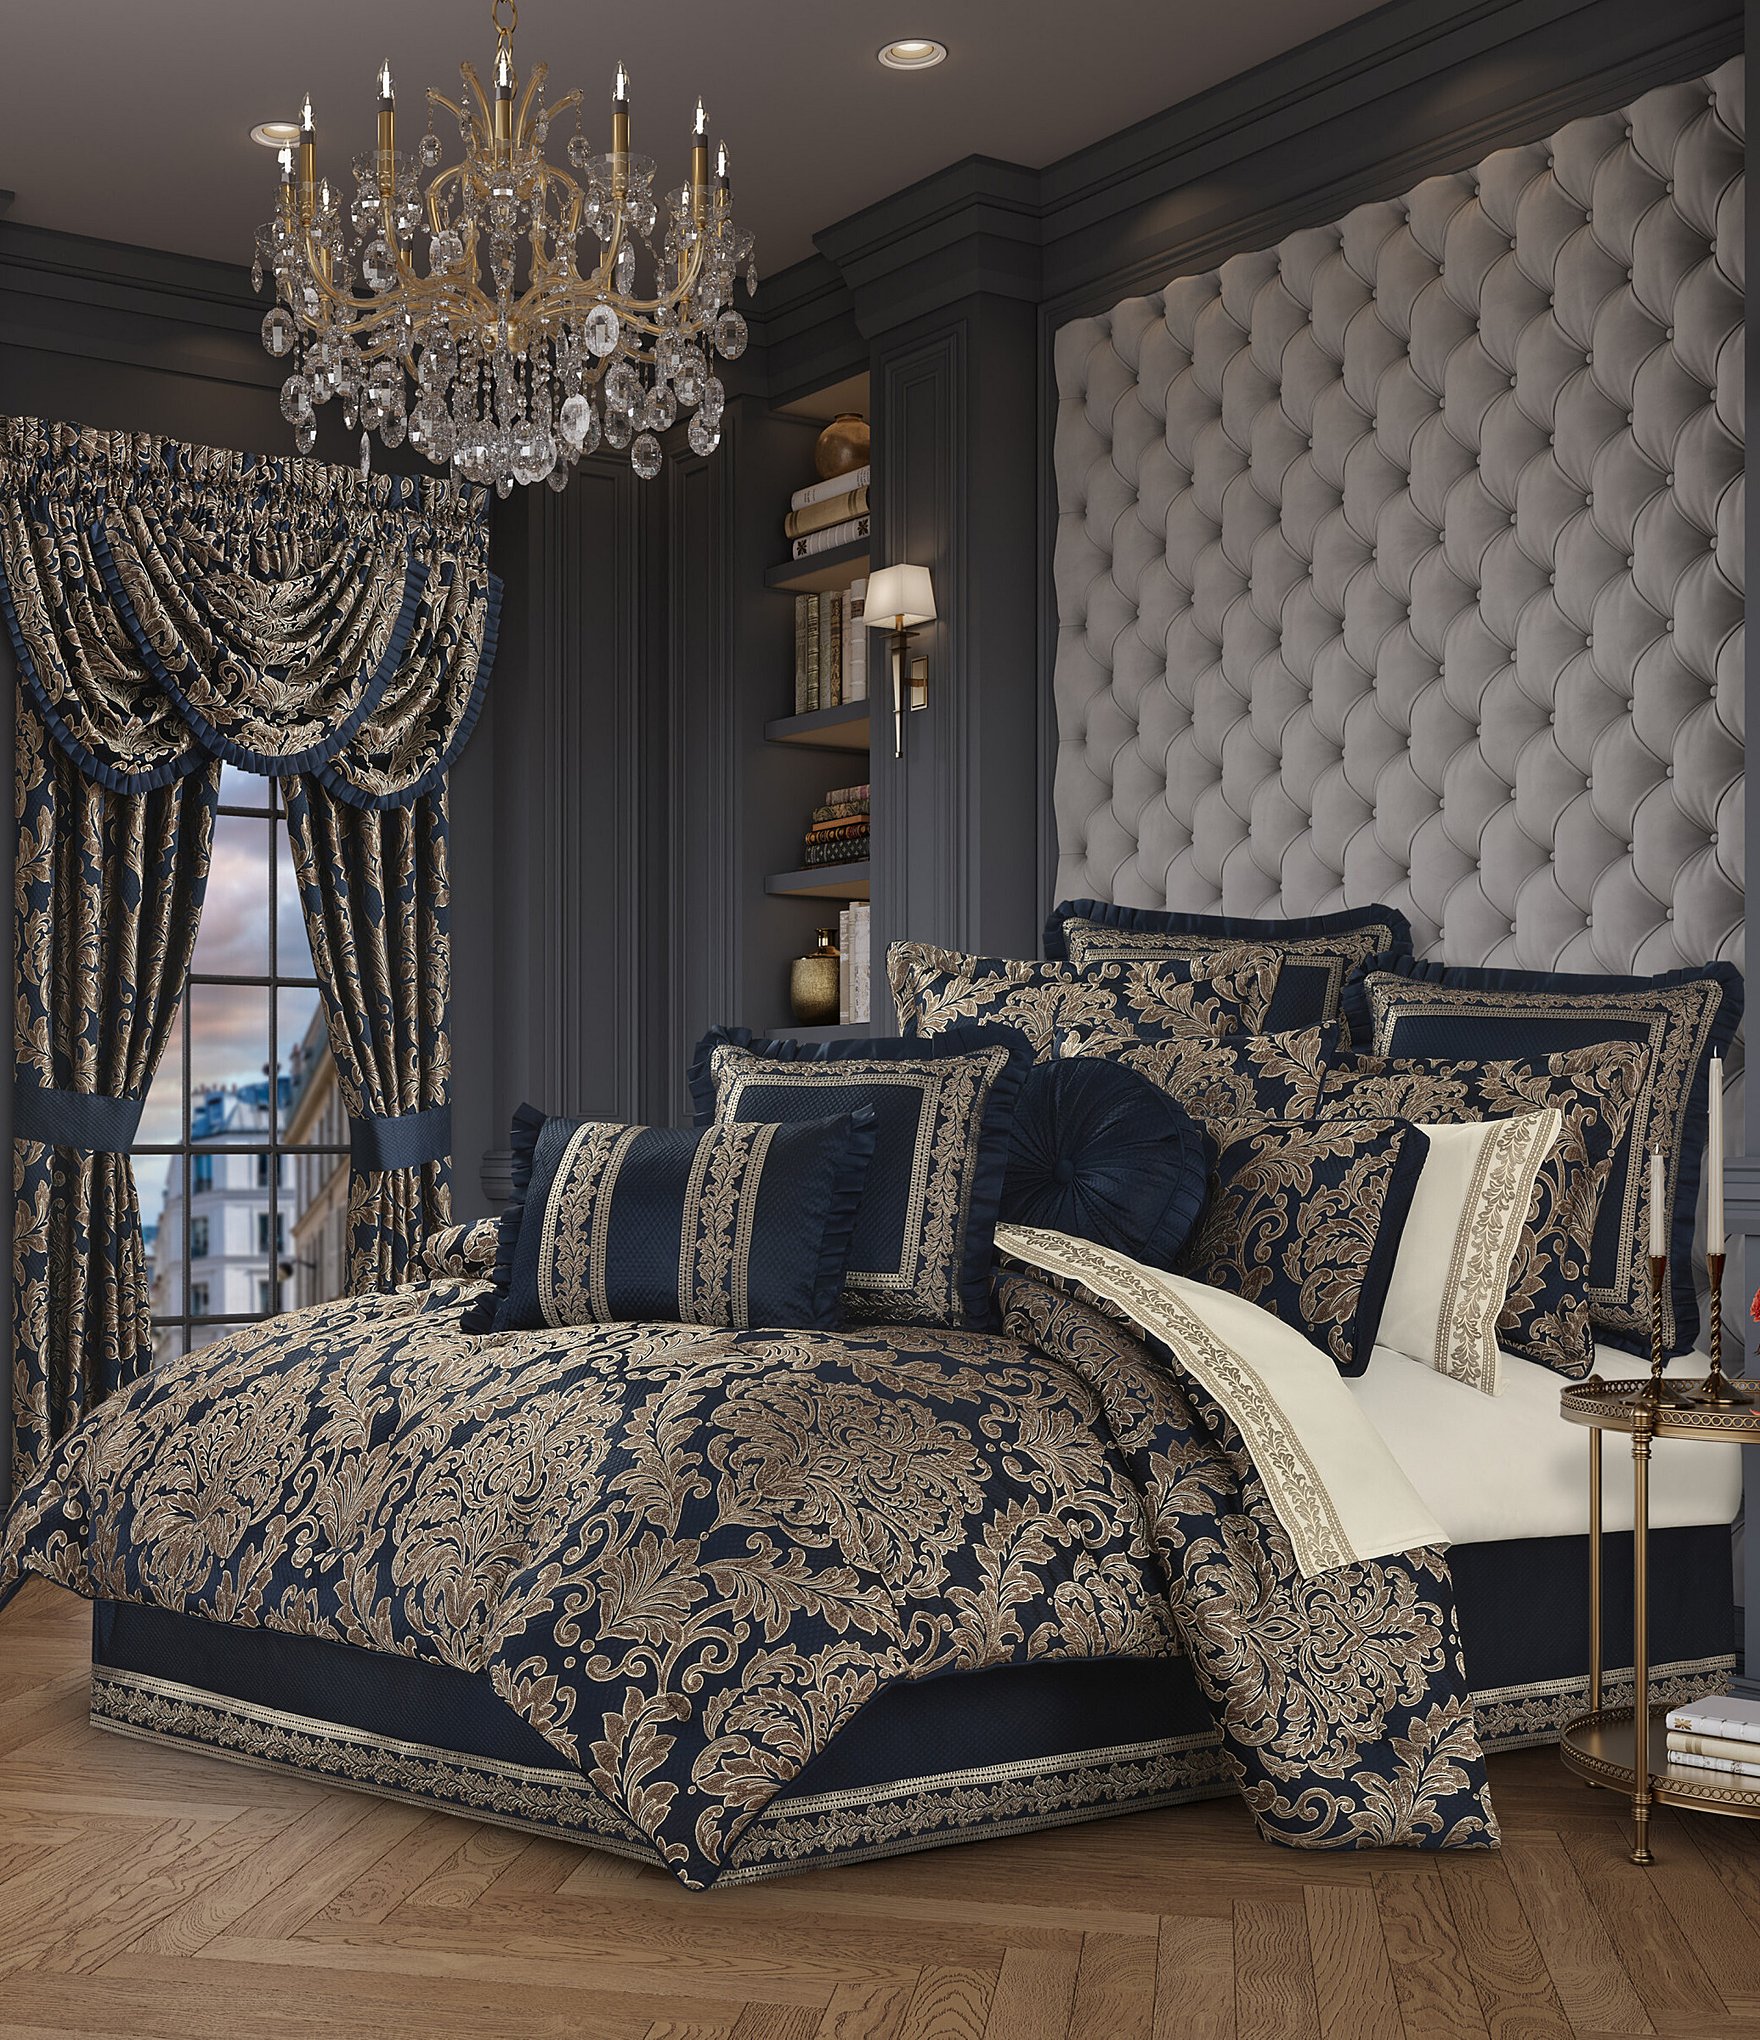 https://dimg.dillards.com/is/image/DillardsZoom/zoom/j.-queen-new-york-monte-carlo-grand-scaled-damask-oversized-comforter-set/00000000_zi_a6a6525c-6514-4981-9e43-49fe46bfcfd3.jpg